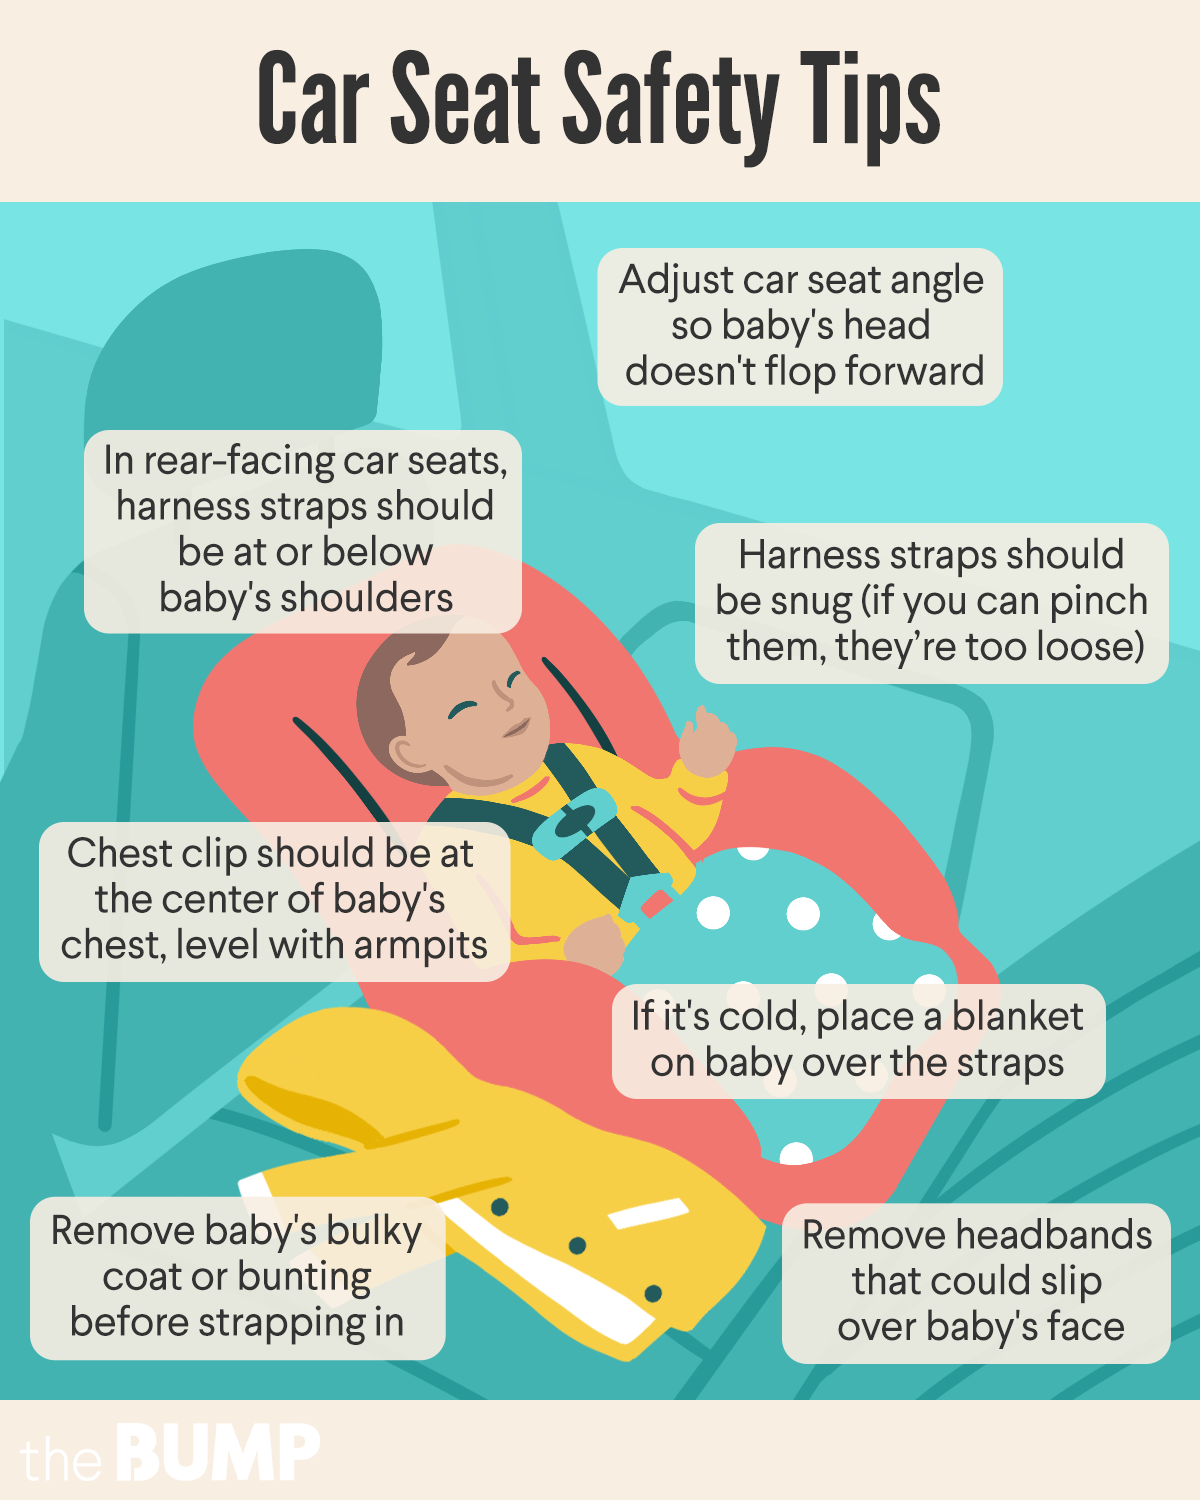 infant car seat weight